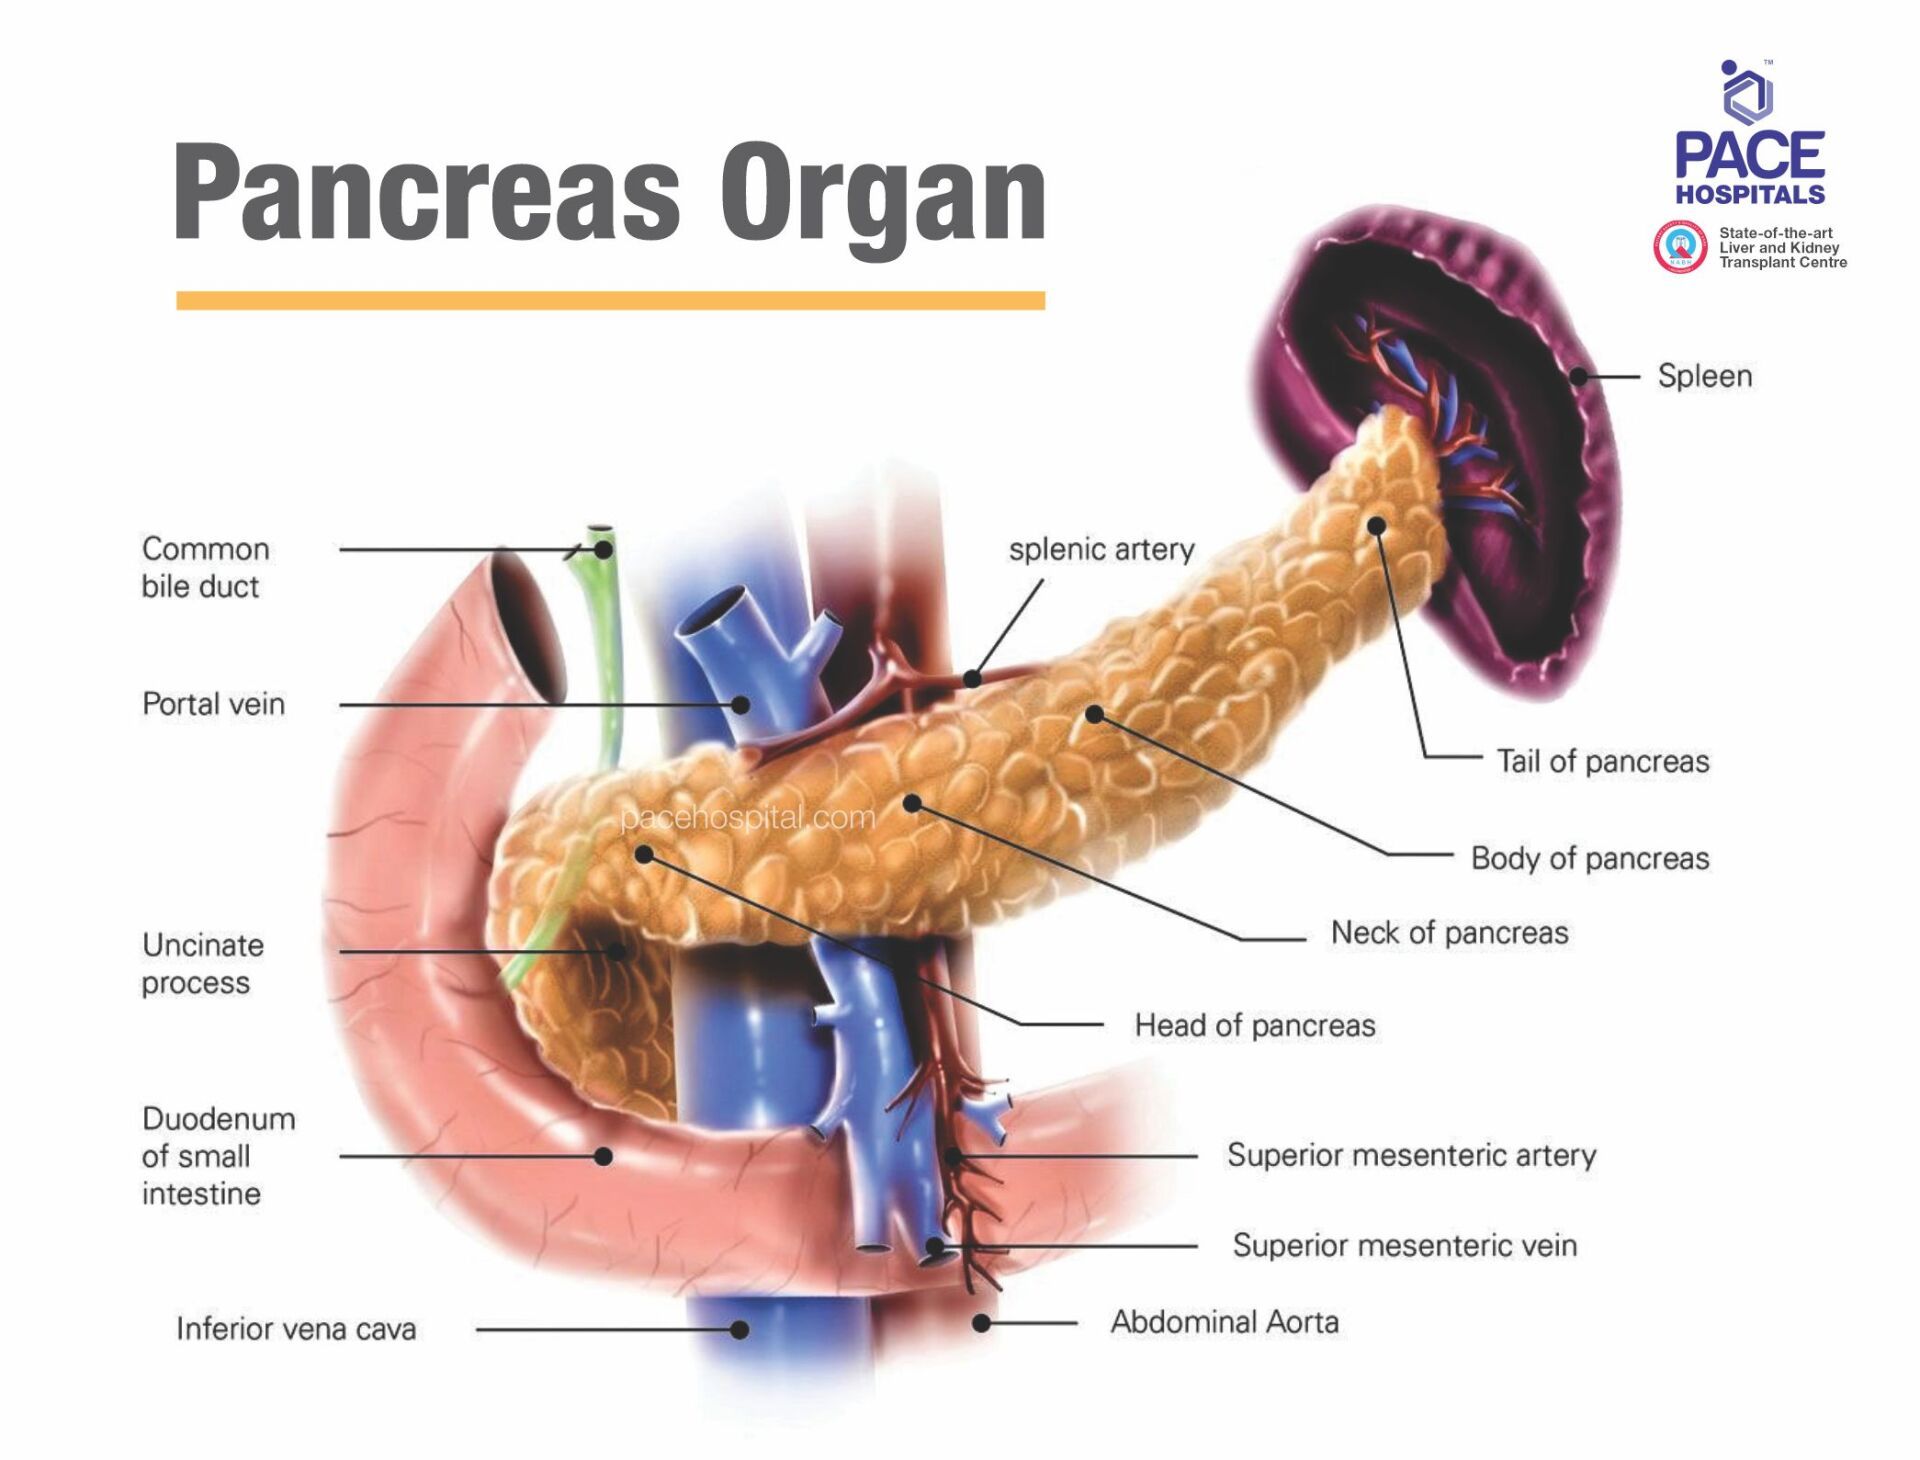 Pancreas gland location in the human body, Where is the pancreas located